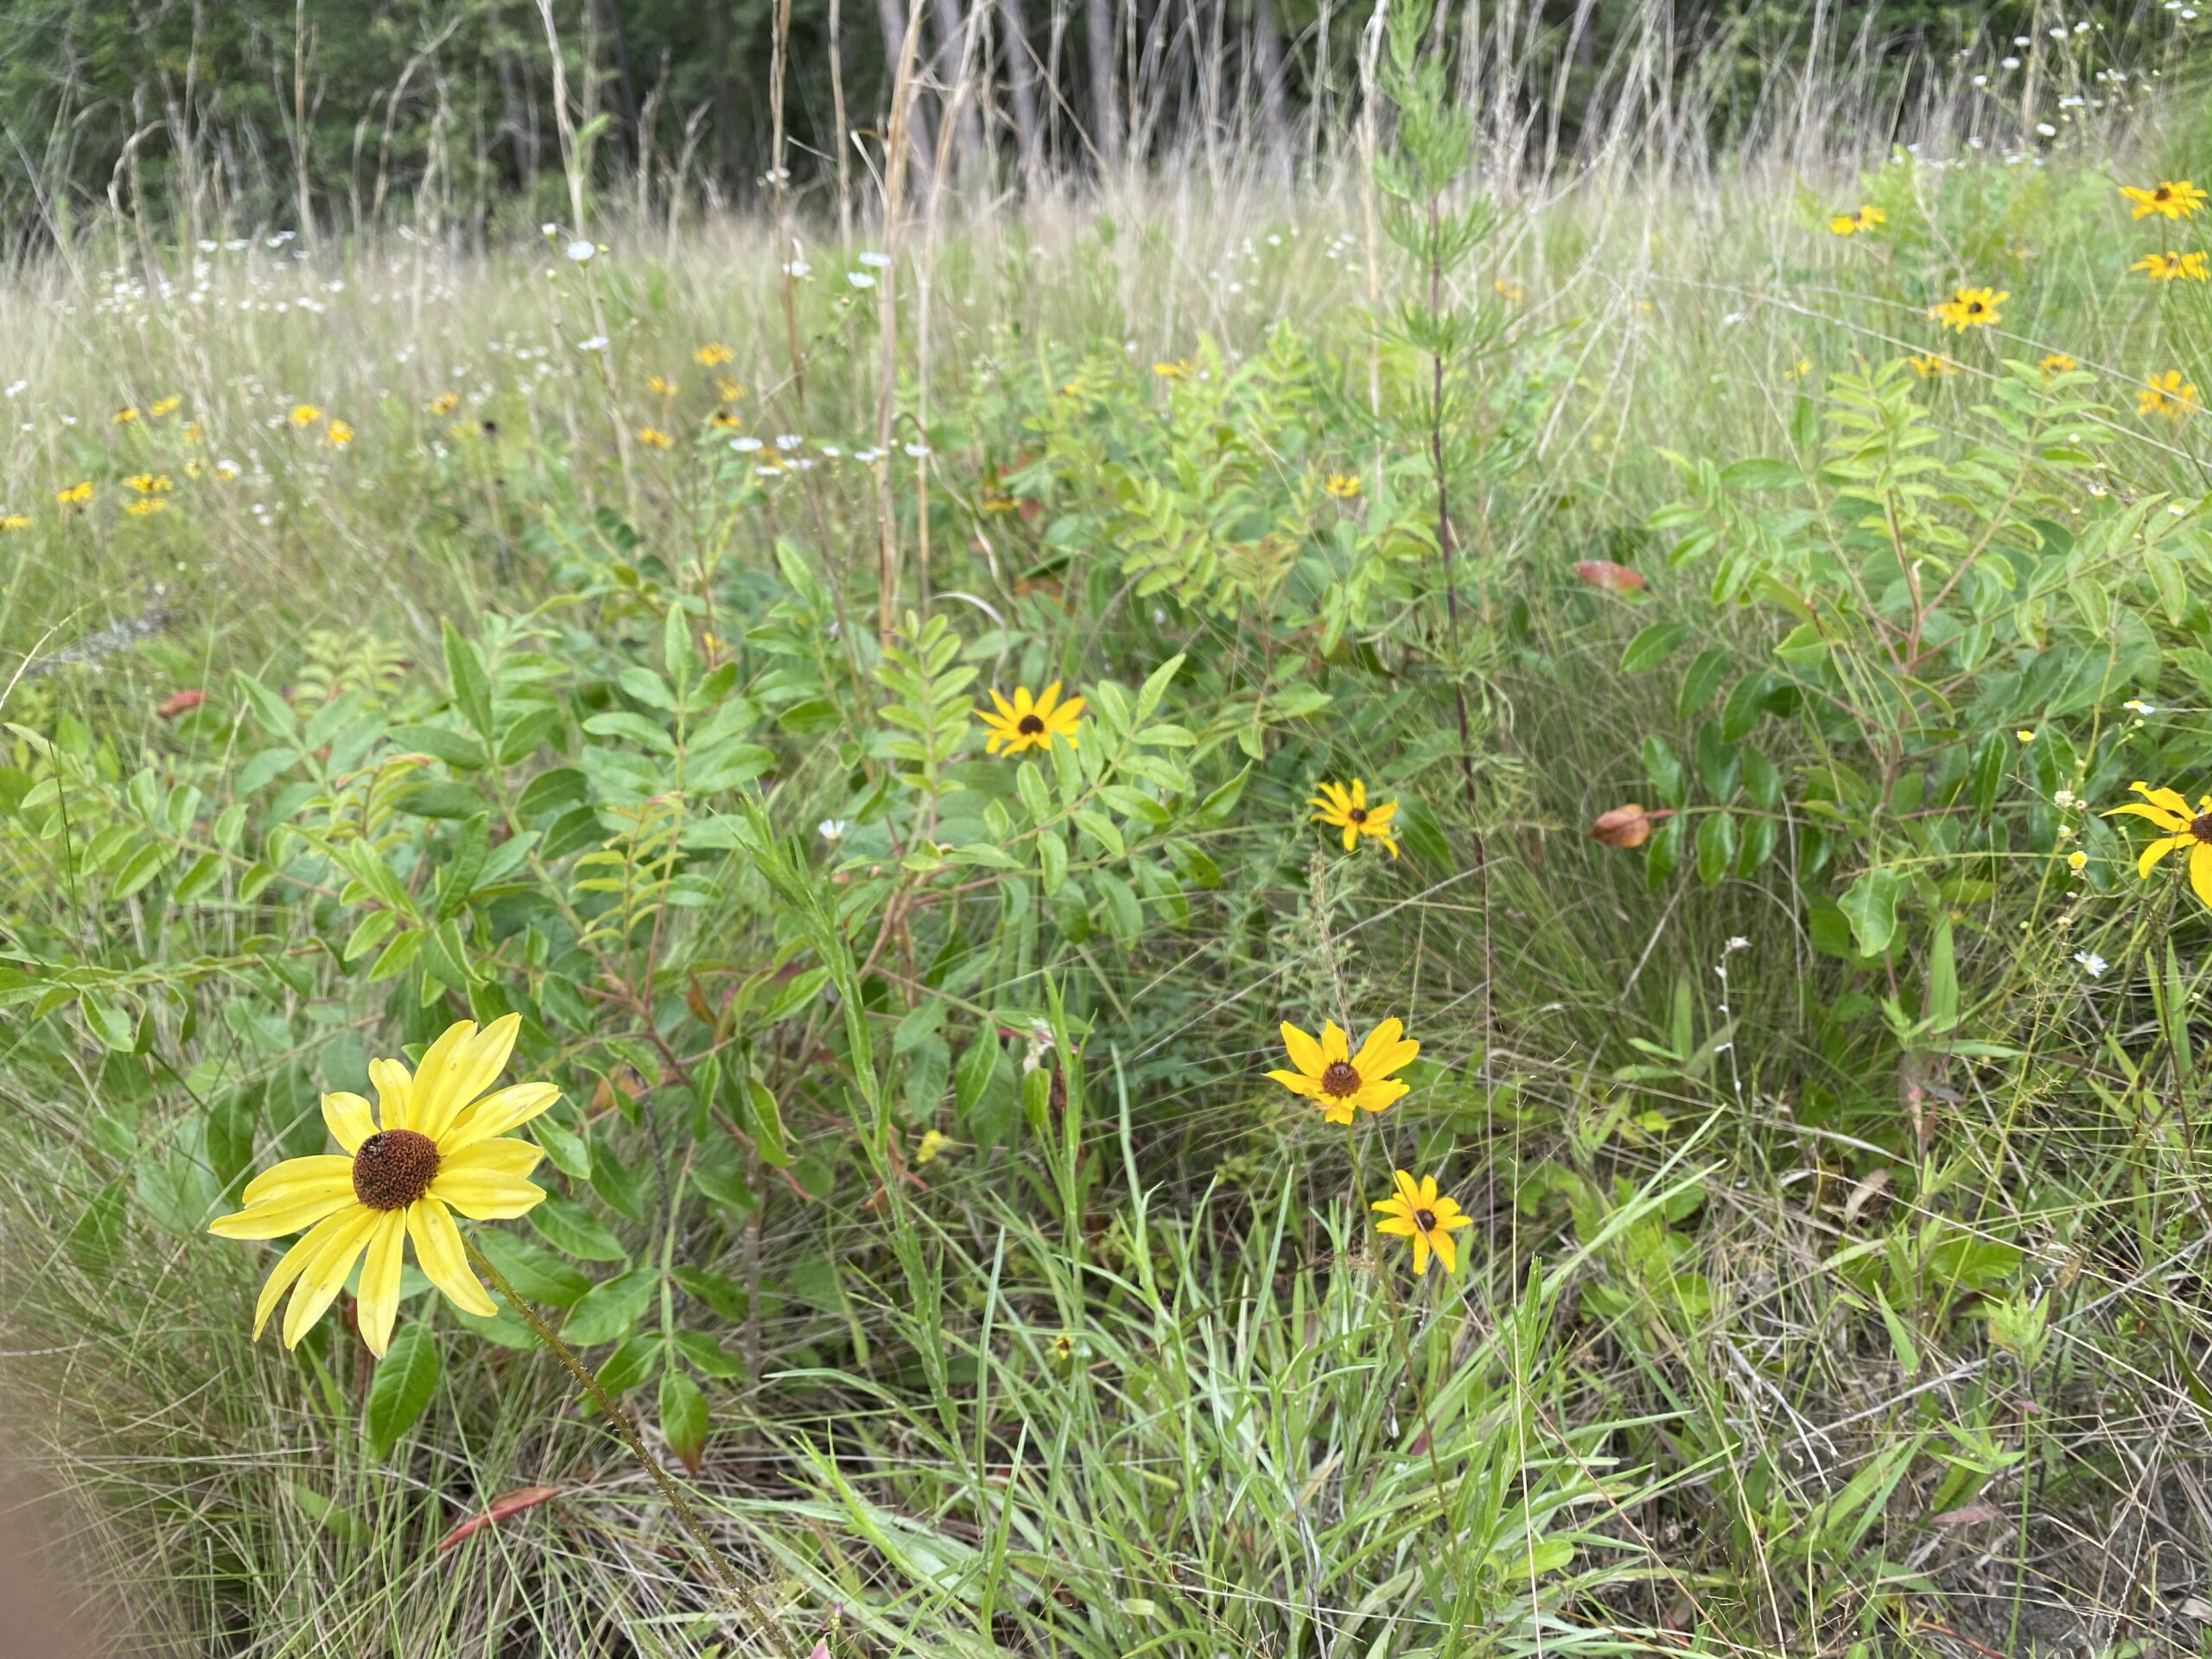 Bright yellow flowers of Rudbeckia hirta, Black-Eyed Susan, bloom among the grasses and wildflowers of the dynamic wetland prairie of Ohoopee Dunes, GA.